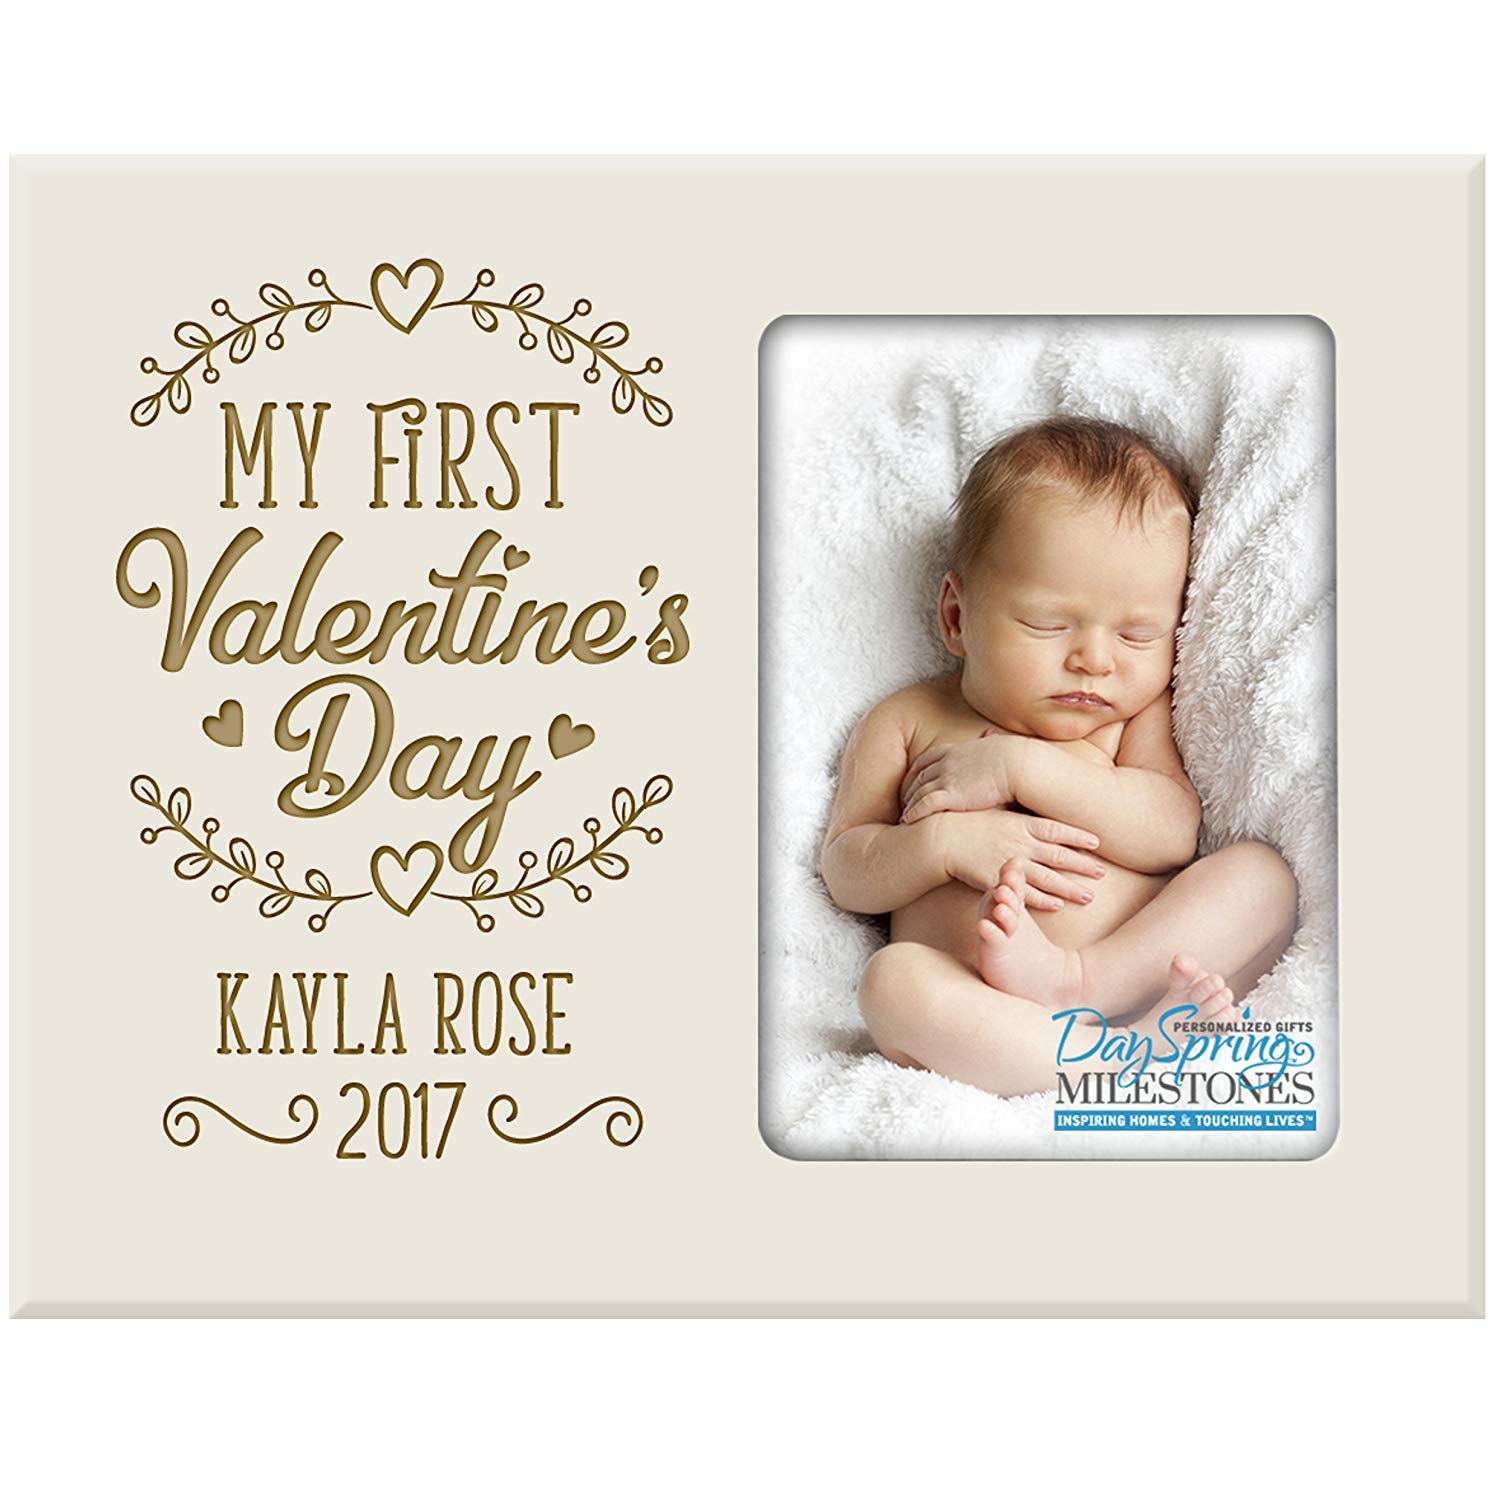 Personalized Valentine's Day Frames - My First Valentine's Day - LifeSong Milestones